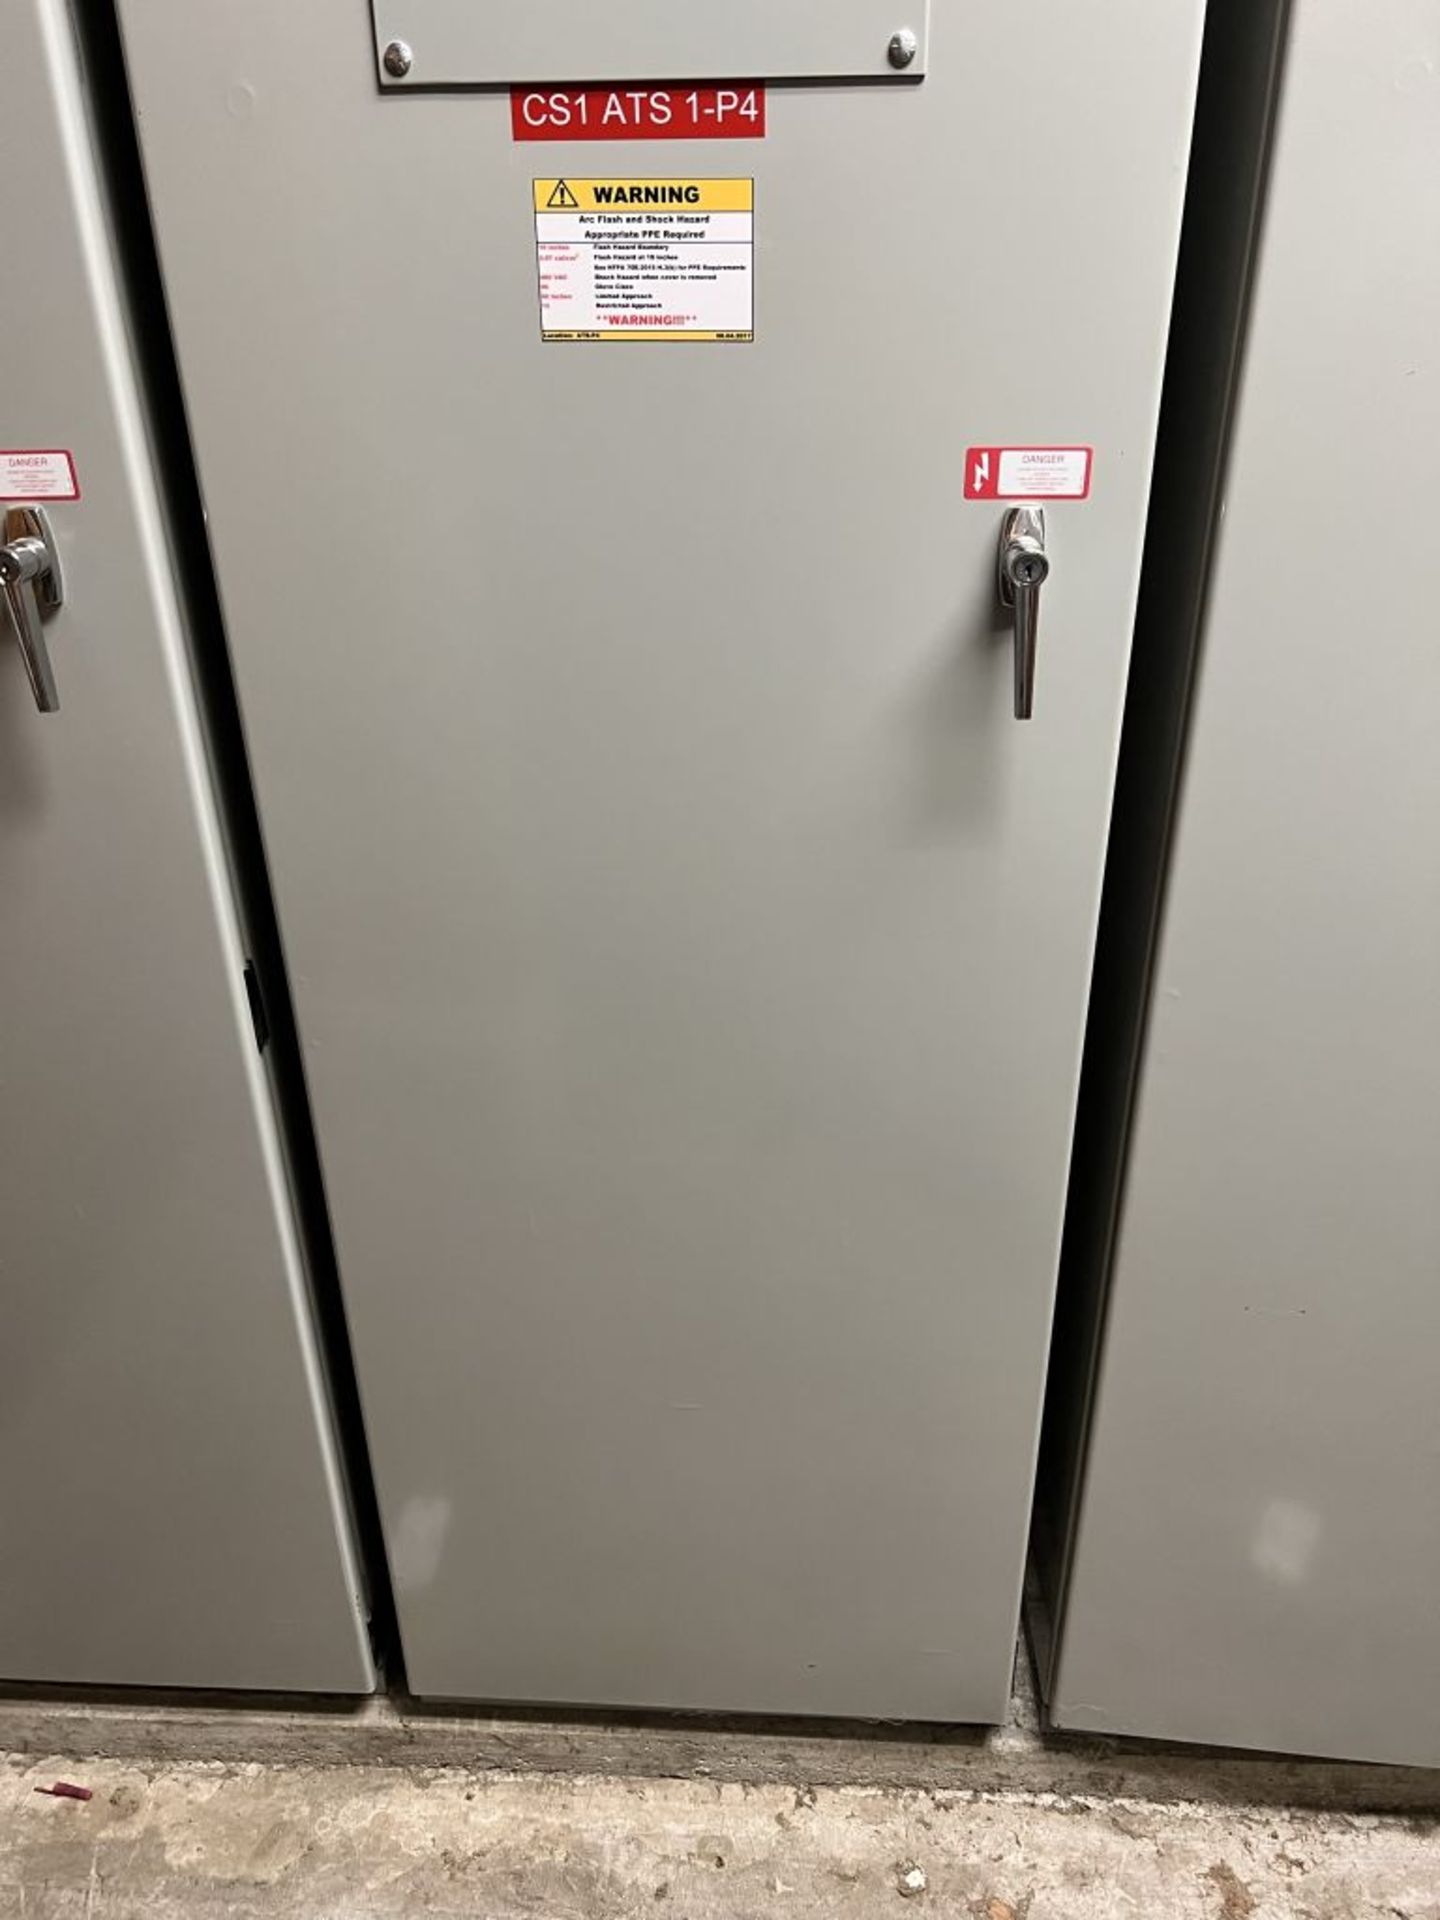 Charlotte, NC - Automatic Russelectric Transfer Switch - Image 2 of 7